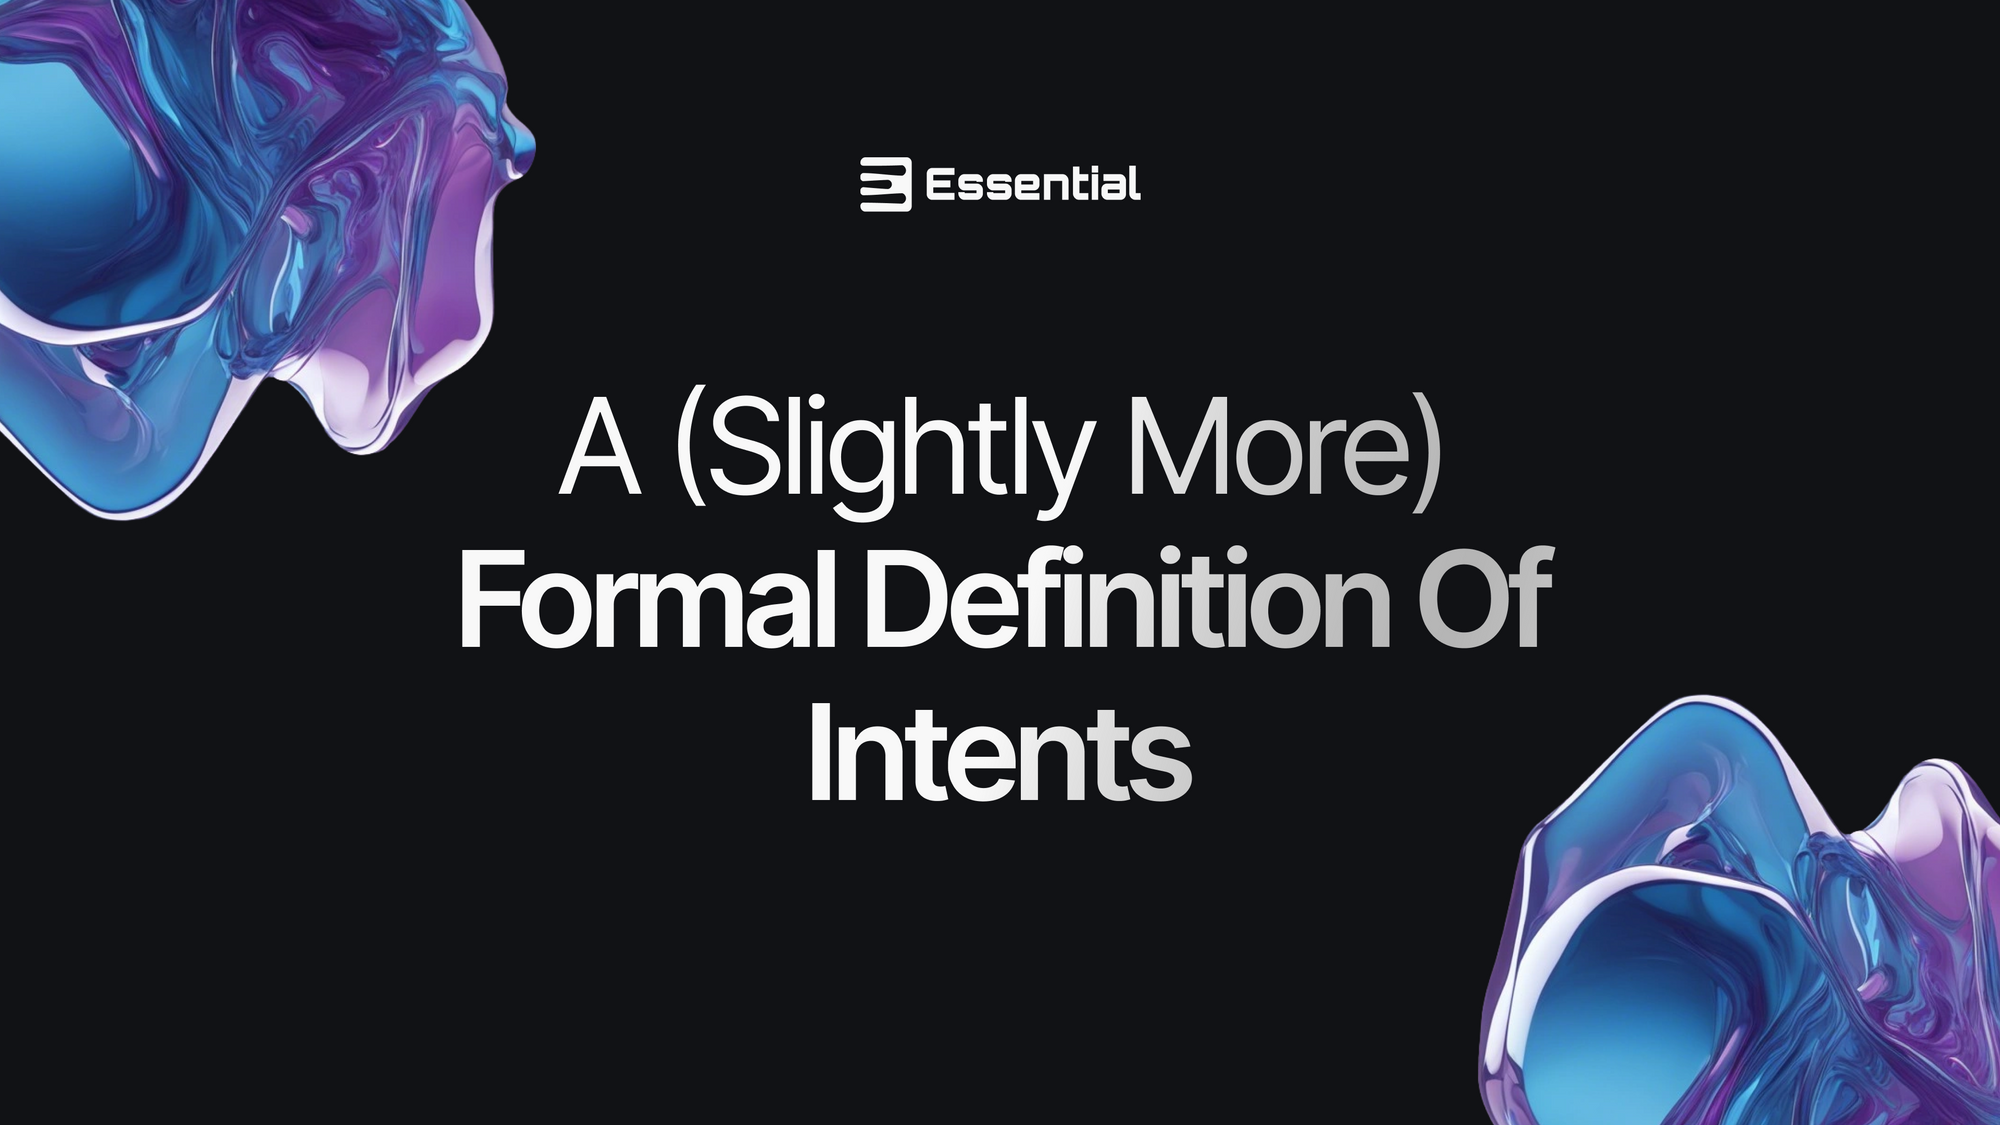 A (Slightly More) Formal Definition of Intents